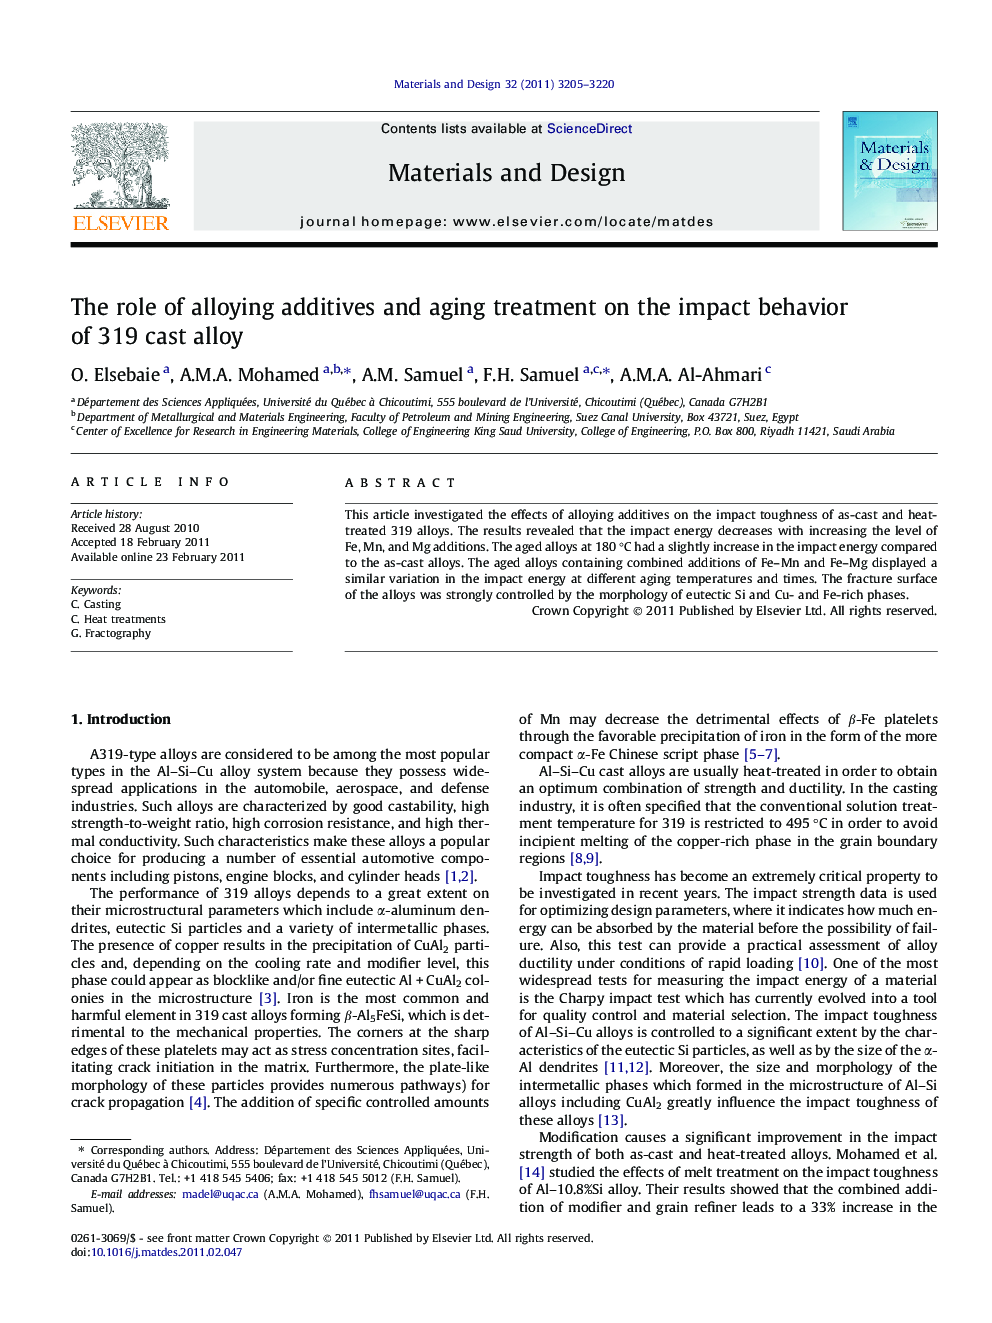 The role of alloying additives and aging treatment on the impact behavior of 319 cast alloy